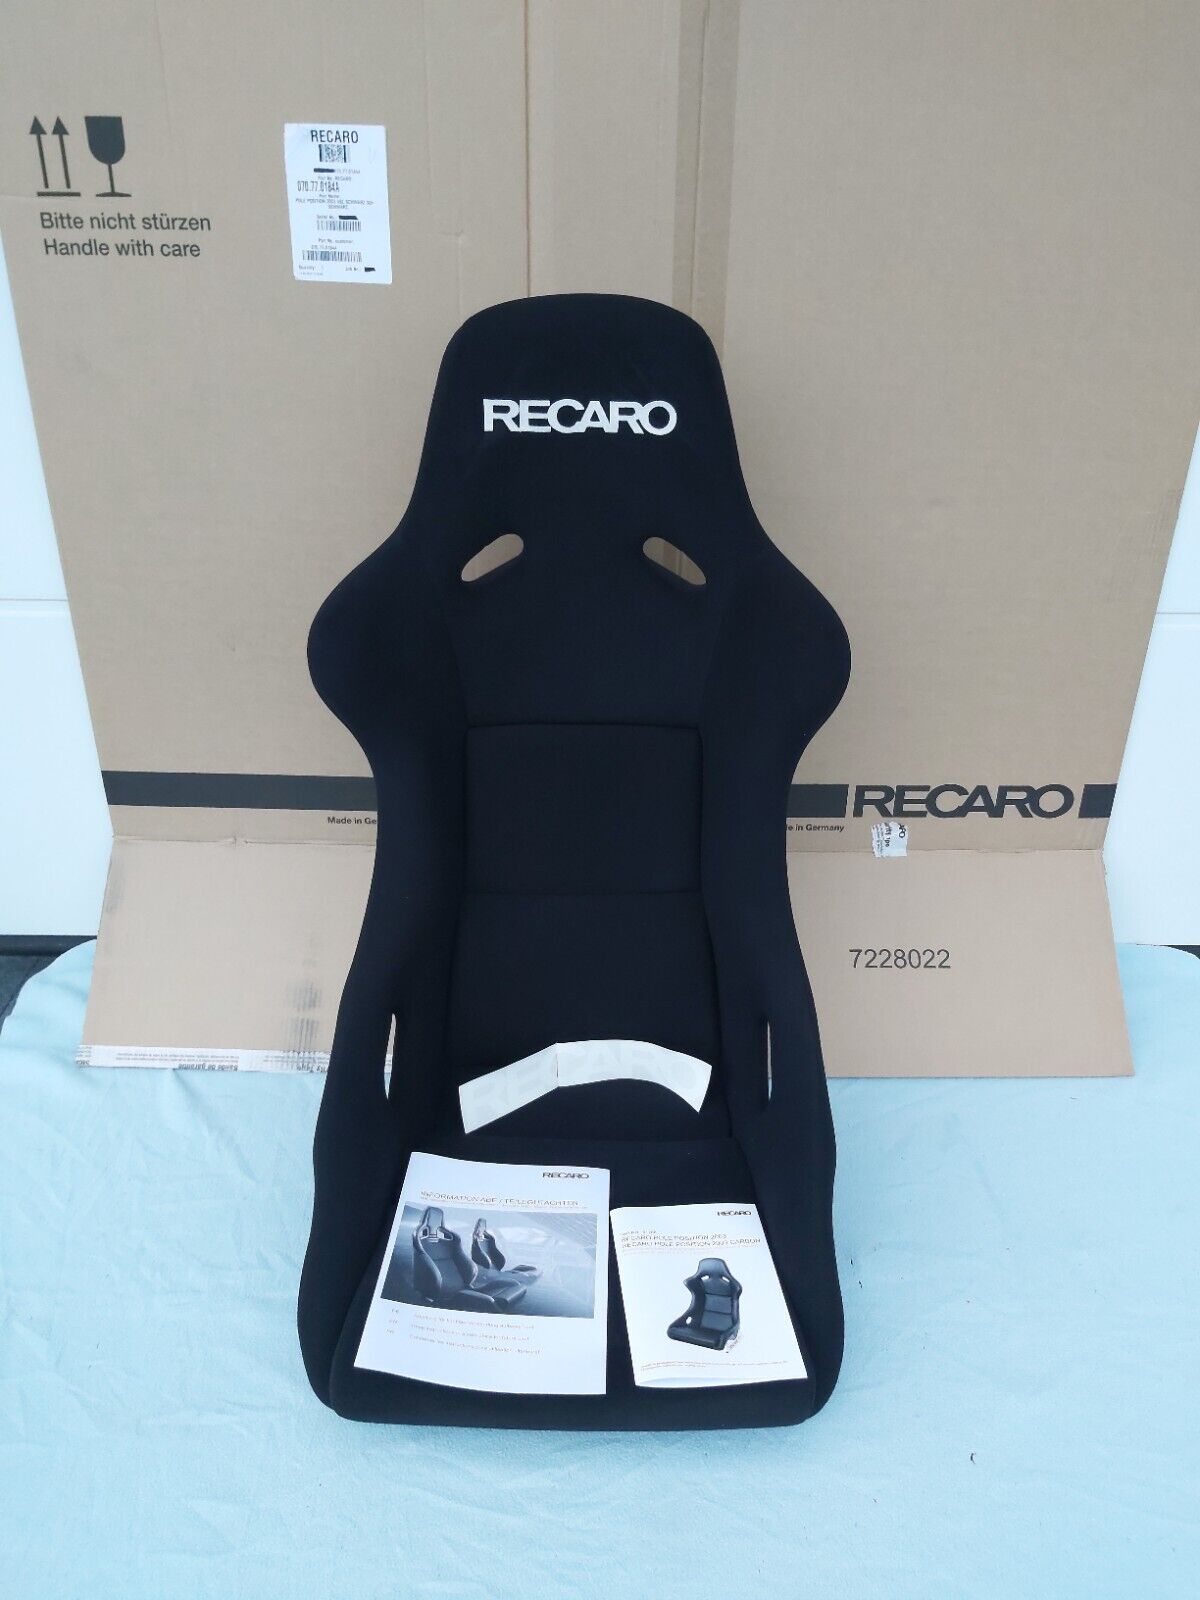 RECARO POLE POSITION SEAT ABE, BRAND NEW, 070.77.0184A MADE IN GERMANY